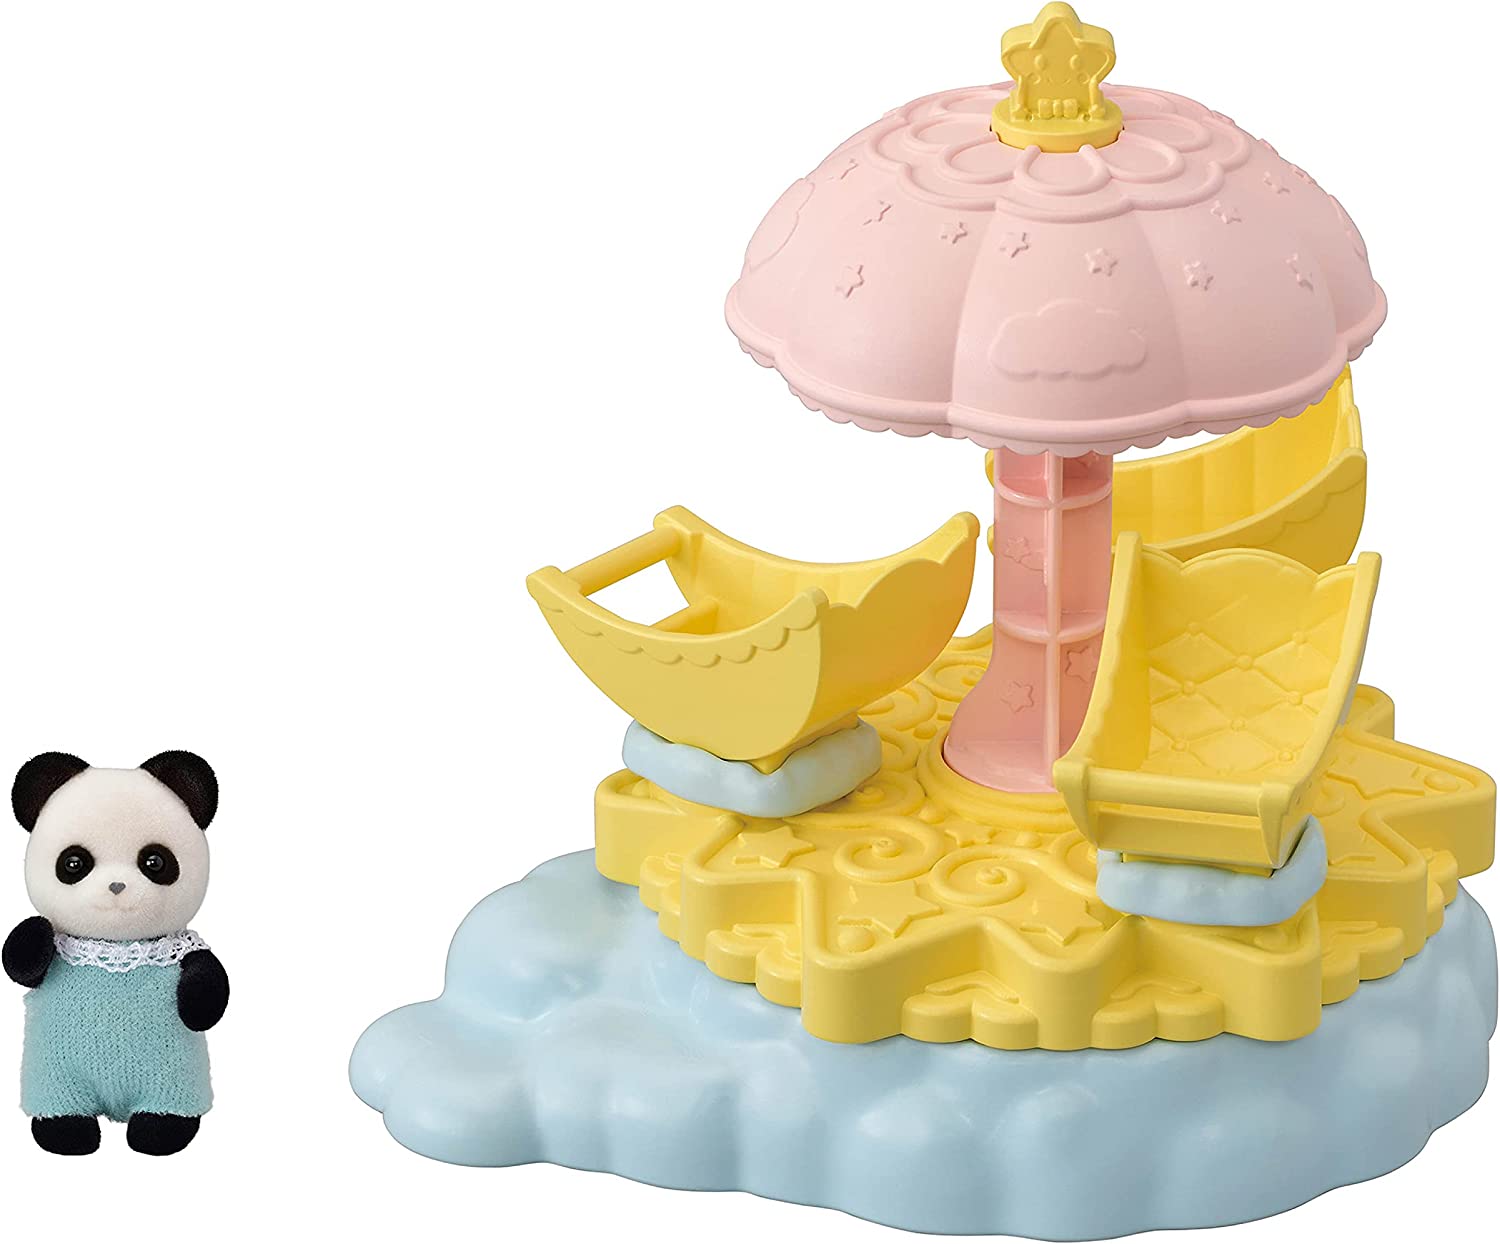 Calico Critters Baby Star Carousel Playset w/ Doll Figure $9.80, Calico Critters Baby Castle Nursery Playset $19.60 + Free Shipping w/ Prime or on $25+